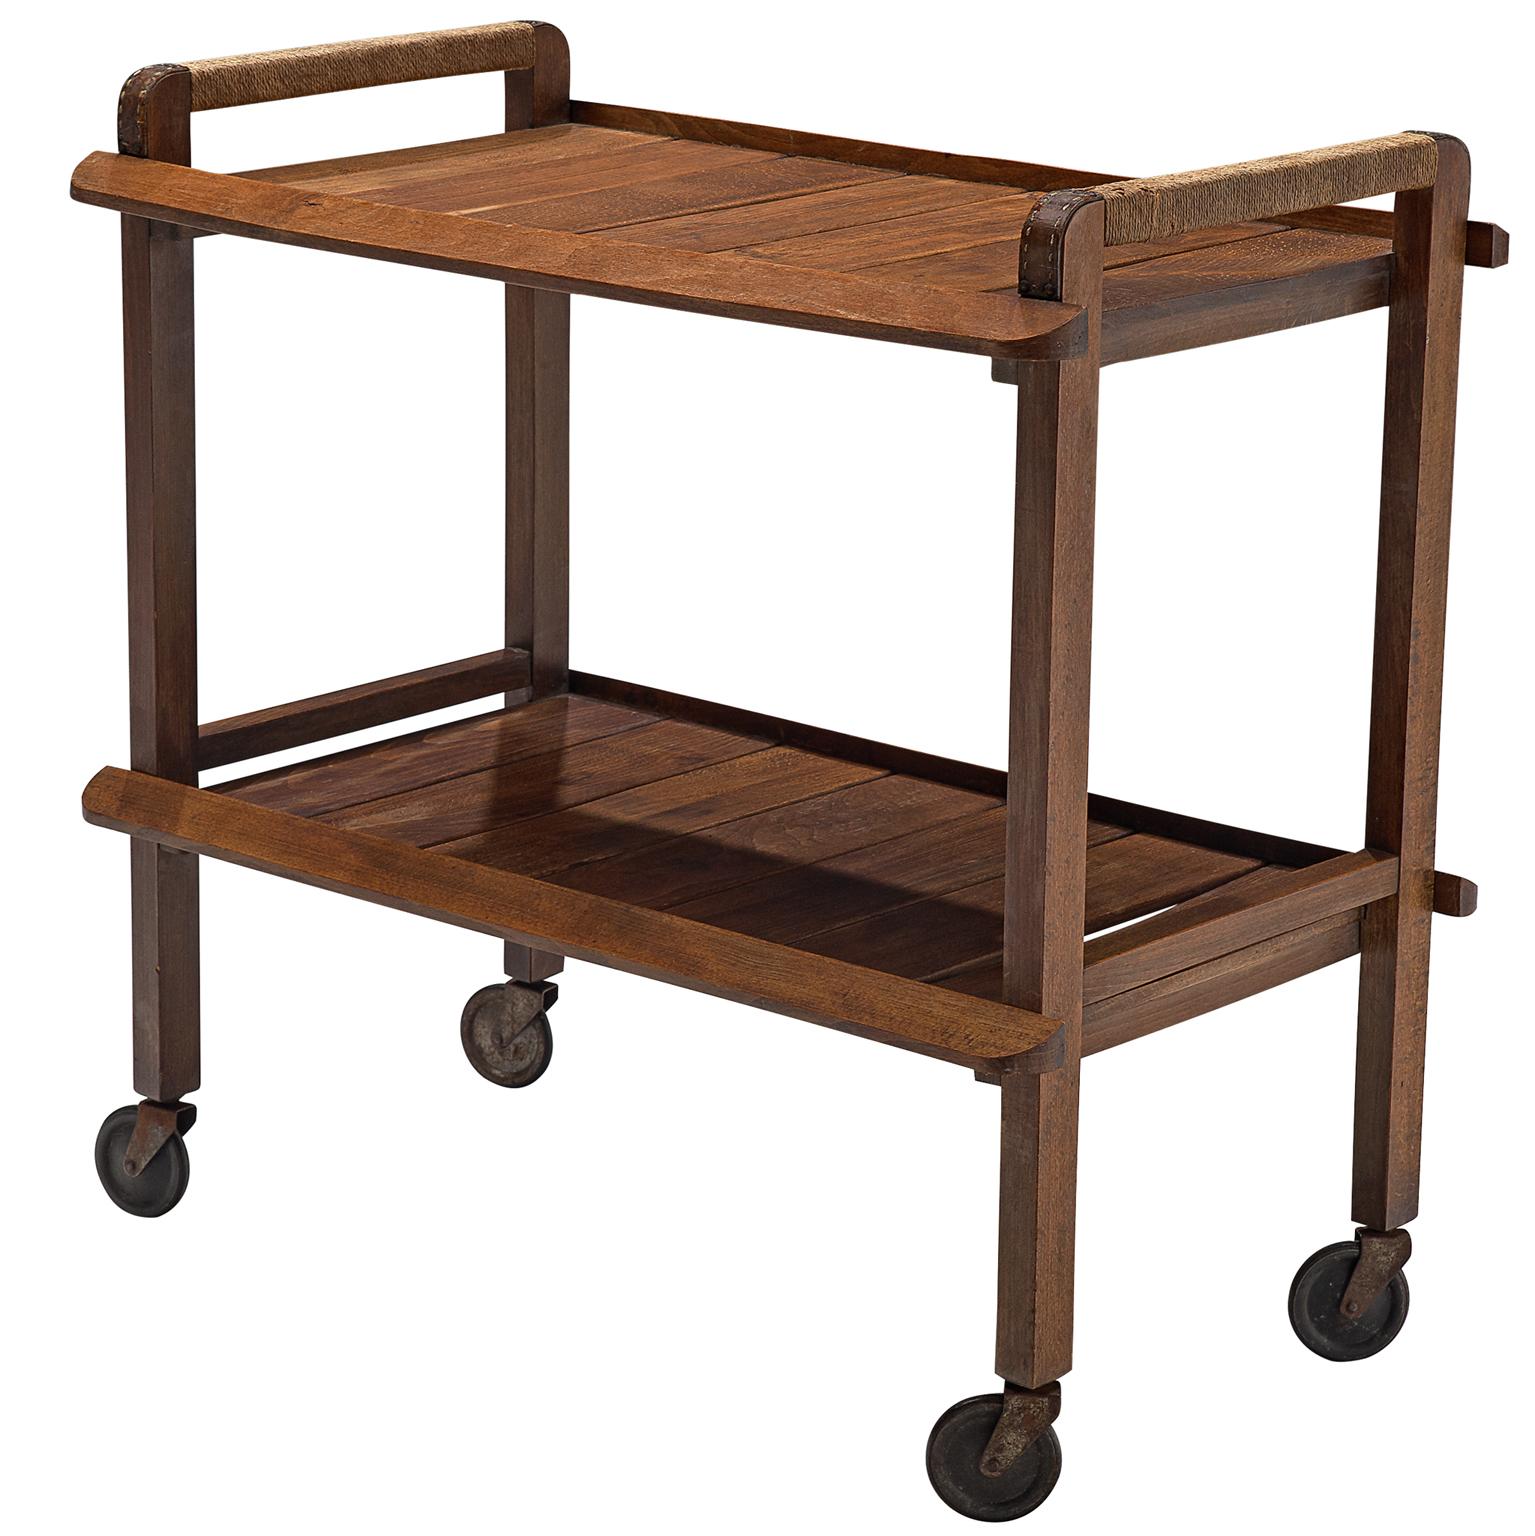 Wooden Midcentury Trolley with Wheels